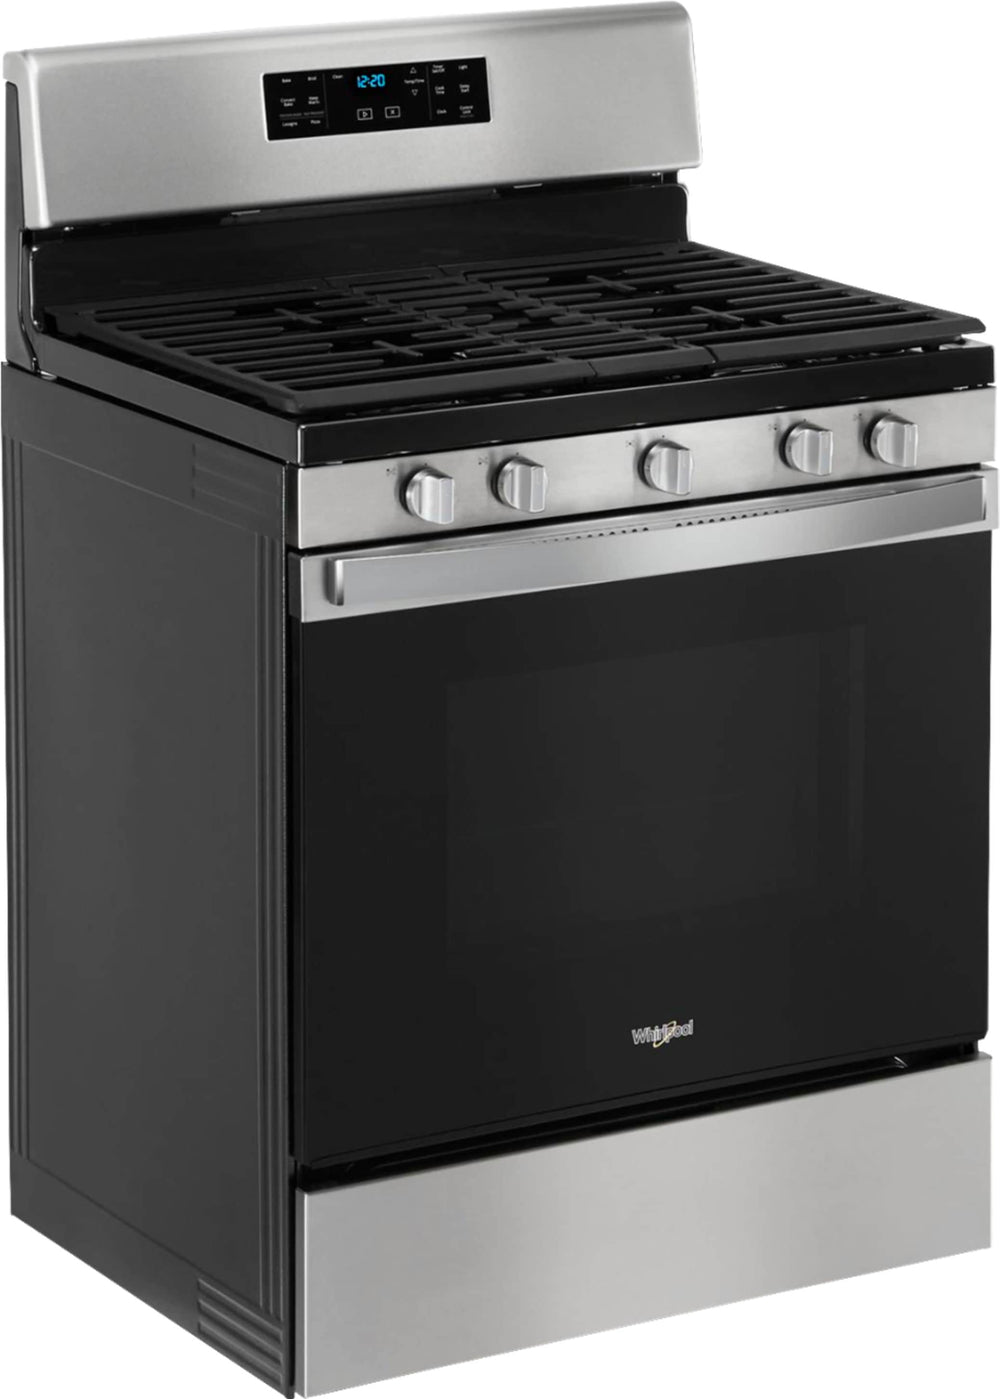 Whirlpool - 5.0 Cu. Ft. Freestanding Gas Convection Range with Self-Cleaning - Stainless steel_1